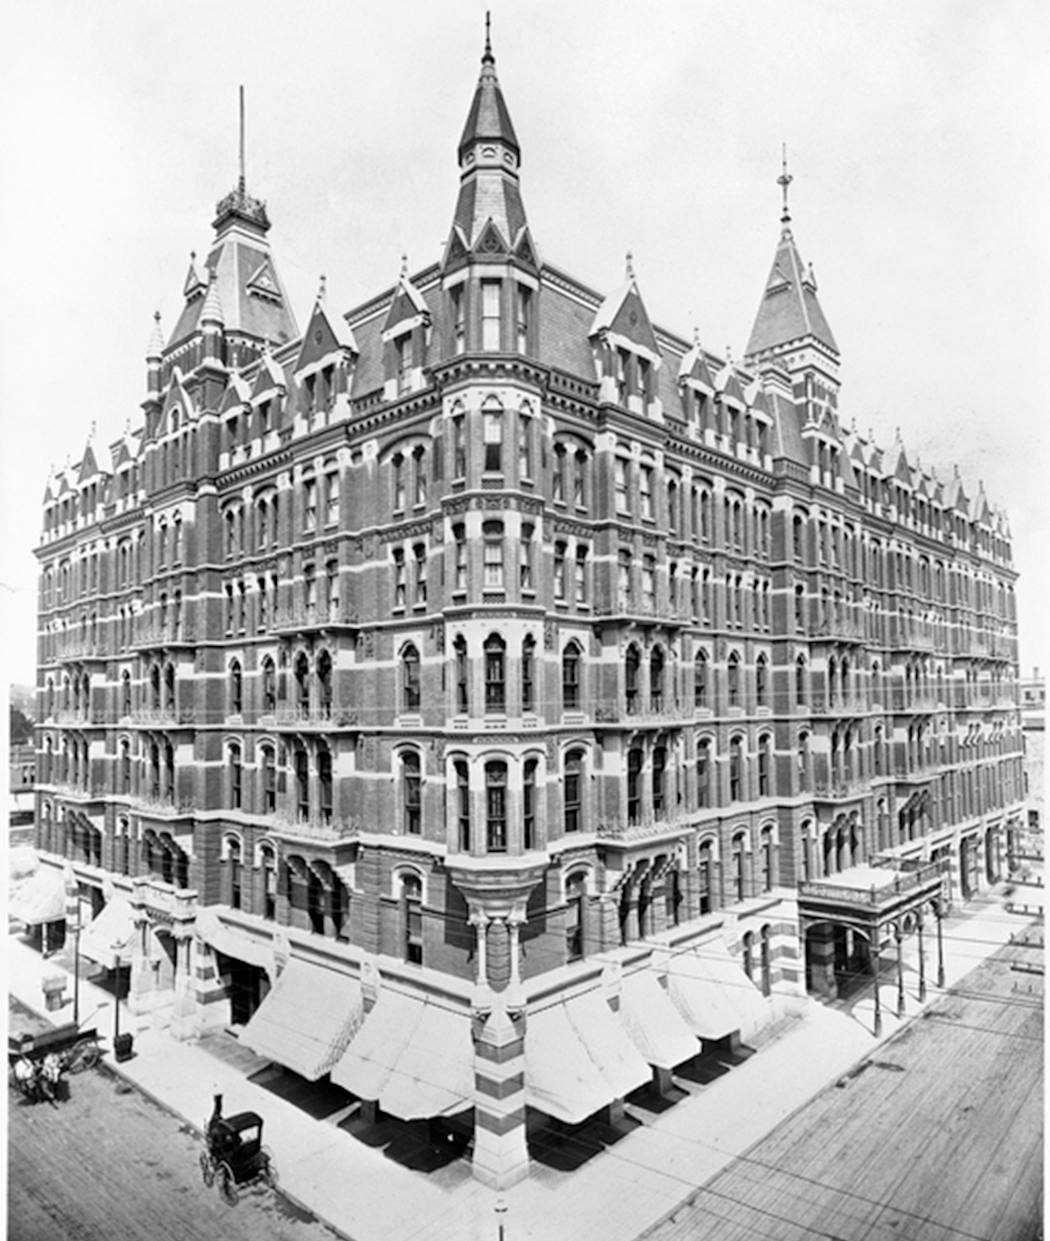 The Ryan (shown circa 1900) was completed in 1885 and demolished with minimal fanfare in 1962.